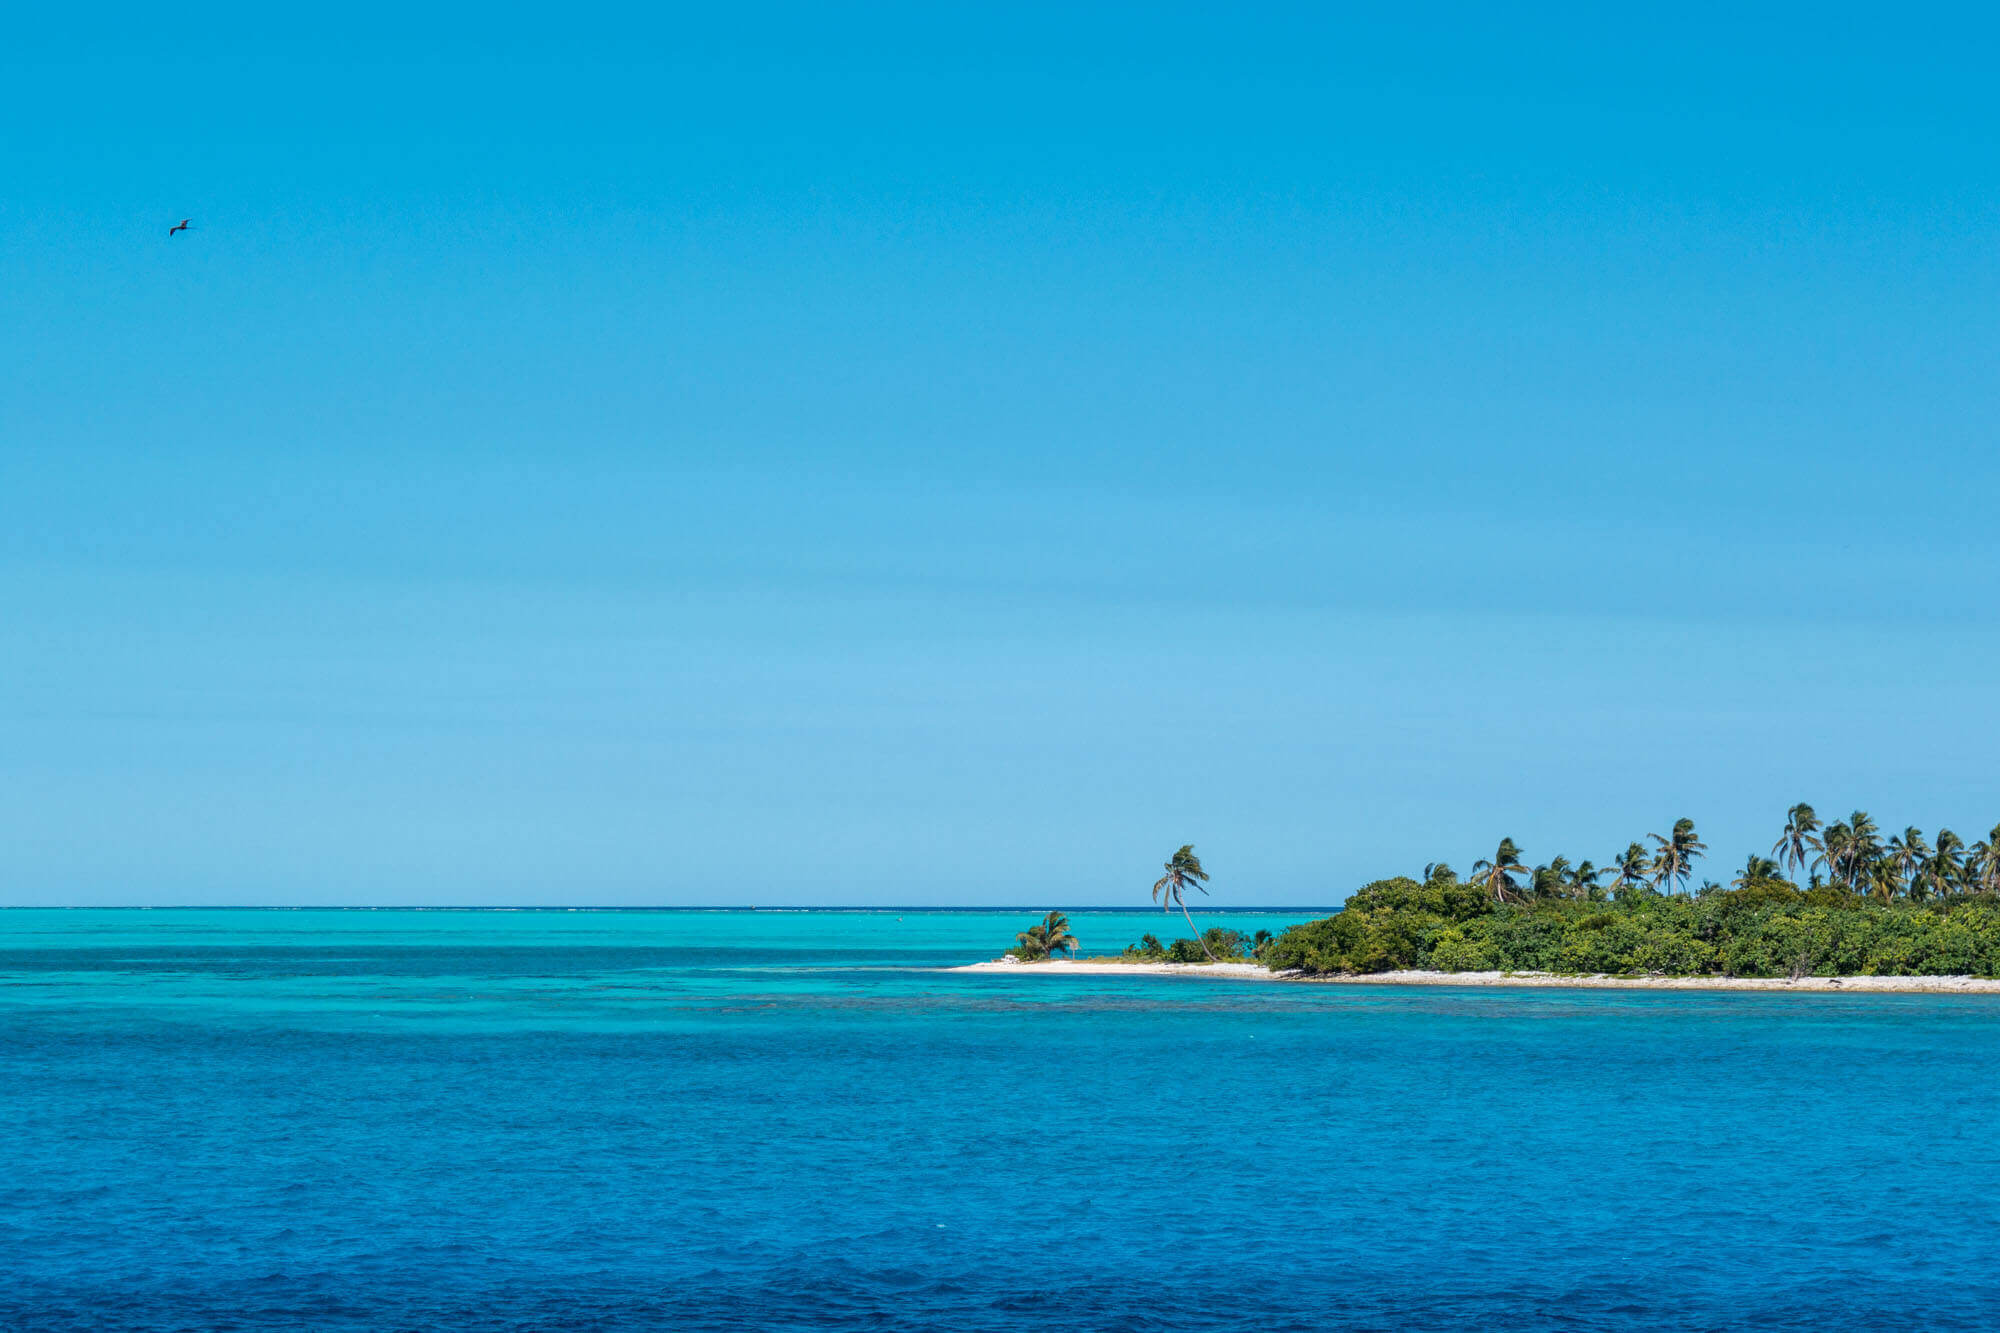 A picture-perfect sandy island surrounded by turquoise water off the coat of Belize